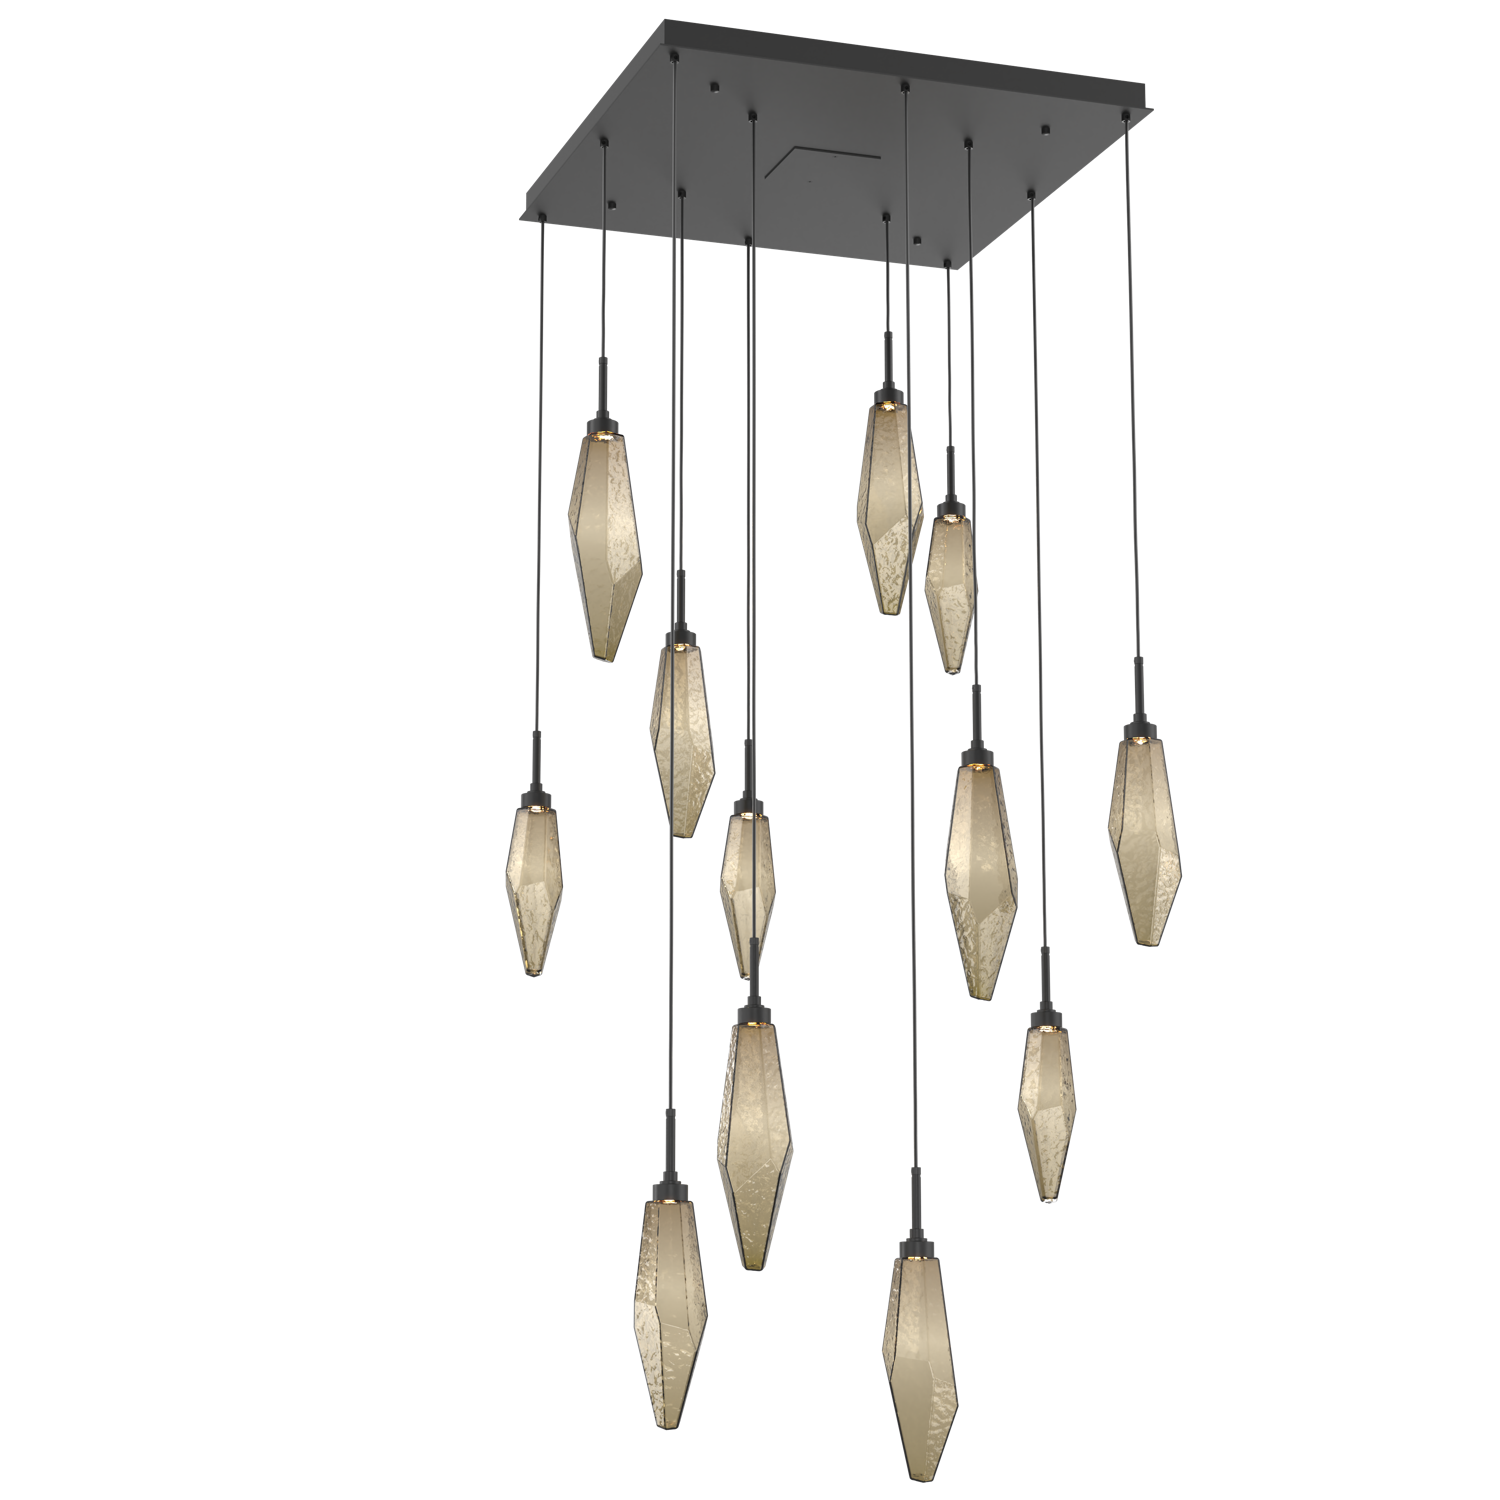 CHB0050-12-MB-CB-Hammerton-Studio-Rock-Crystal-12-light-square-pendant-chandelier-with-matte-black-finish-and-chilled-bronze-blown-glass-shades-and-LED-lamping